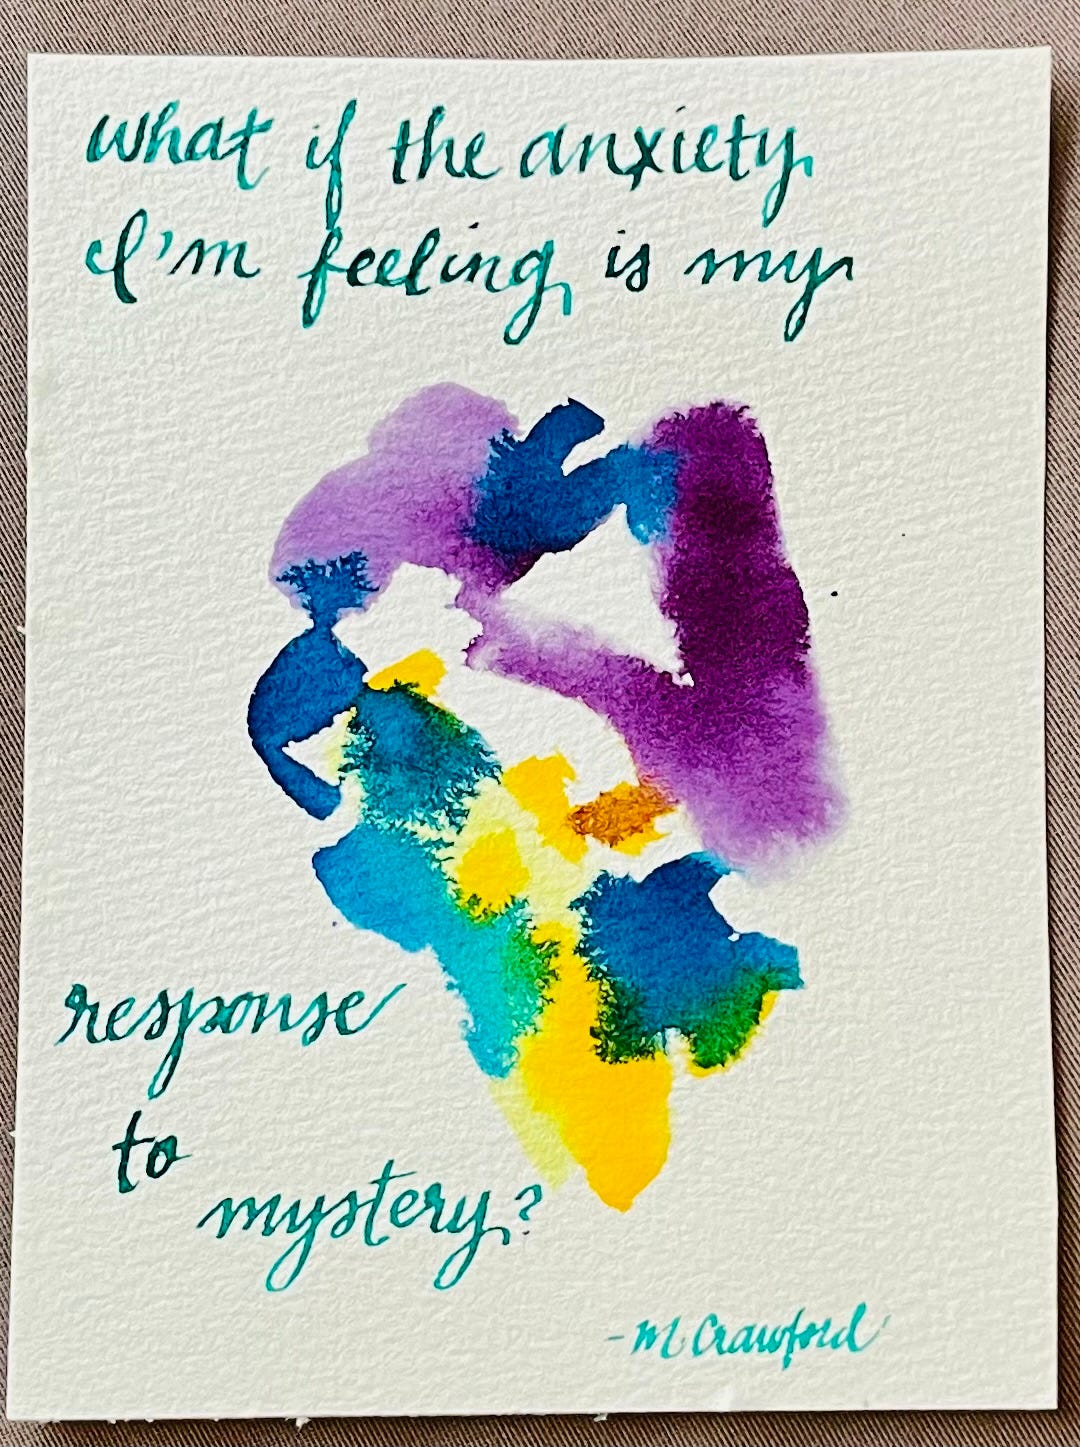 A painting with the words: "What if the anxiety I'm feeling is my response to mystery?" - Martha Crawford